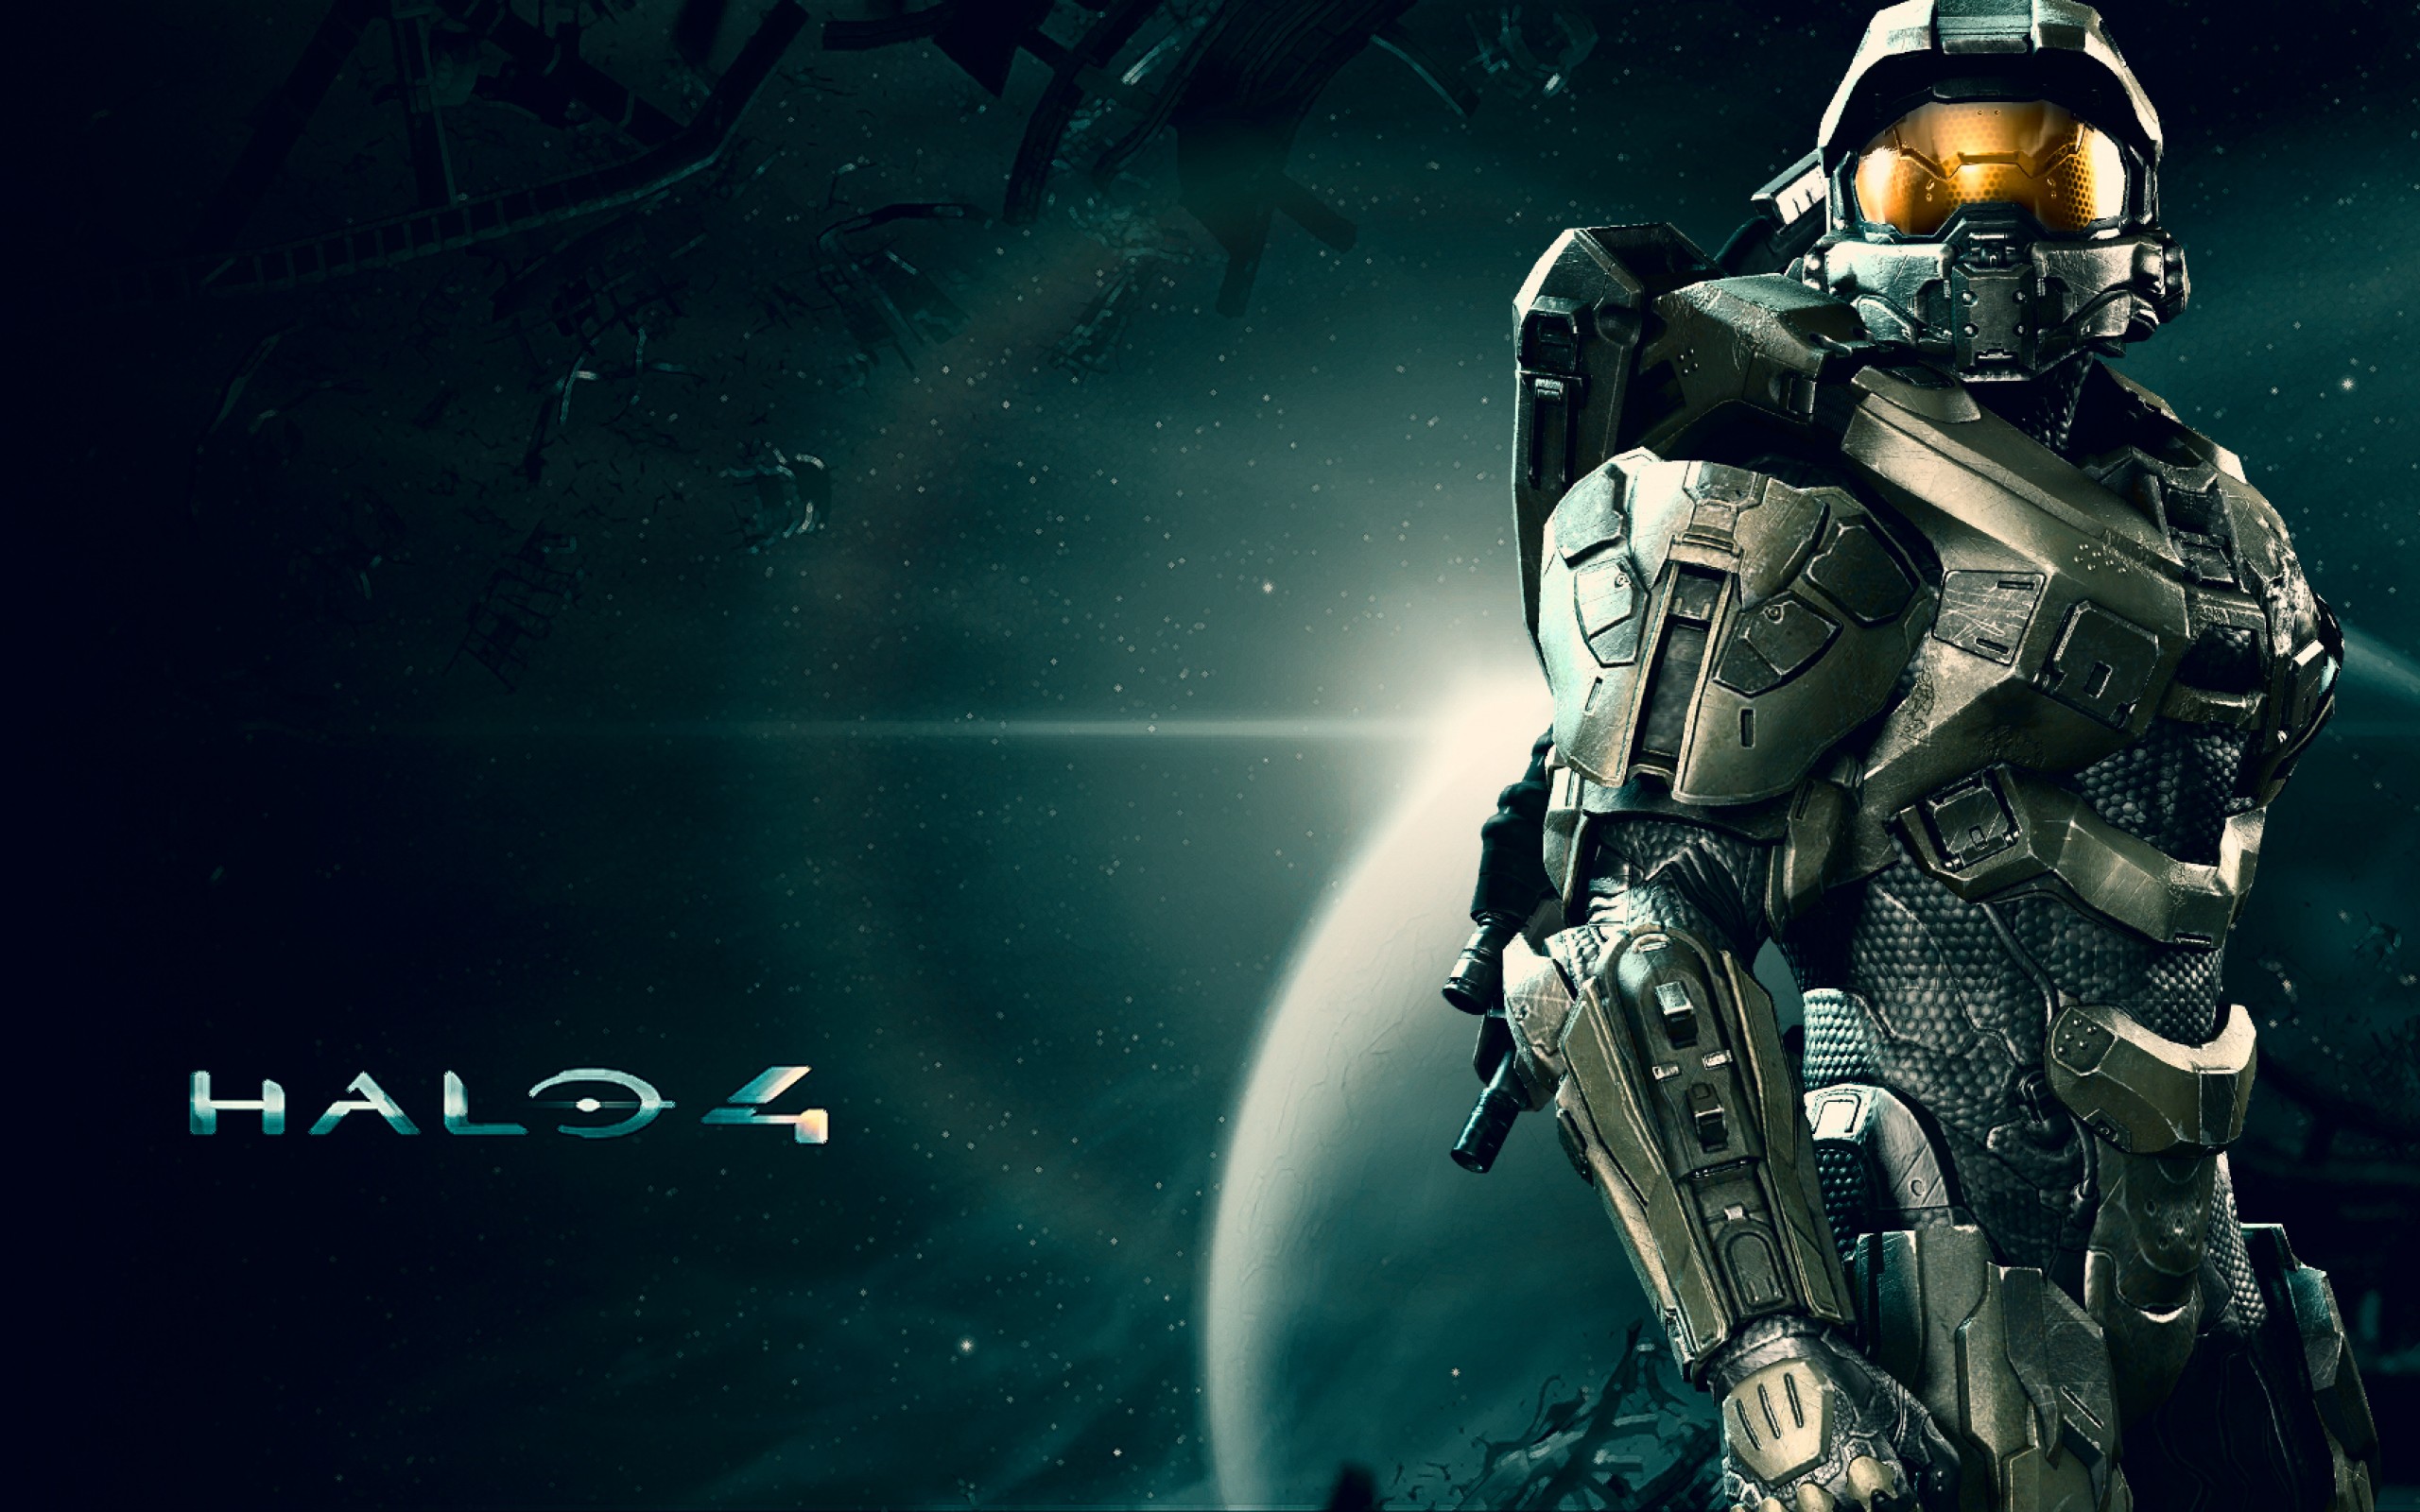 86 Halo 4 HD Wallpapers | Backgrounds - Wallpaper Abyss